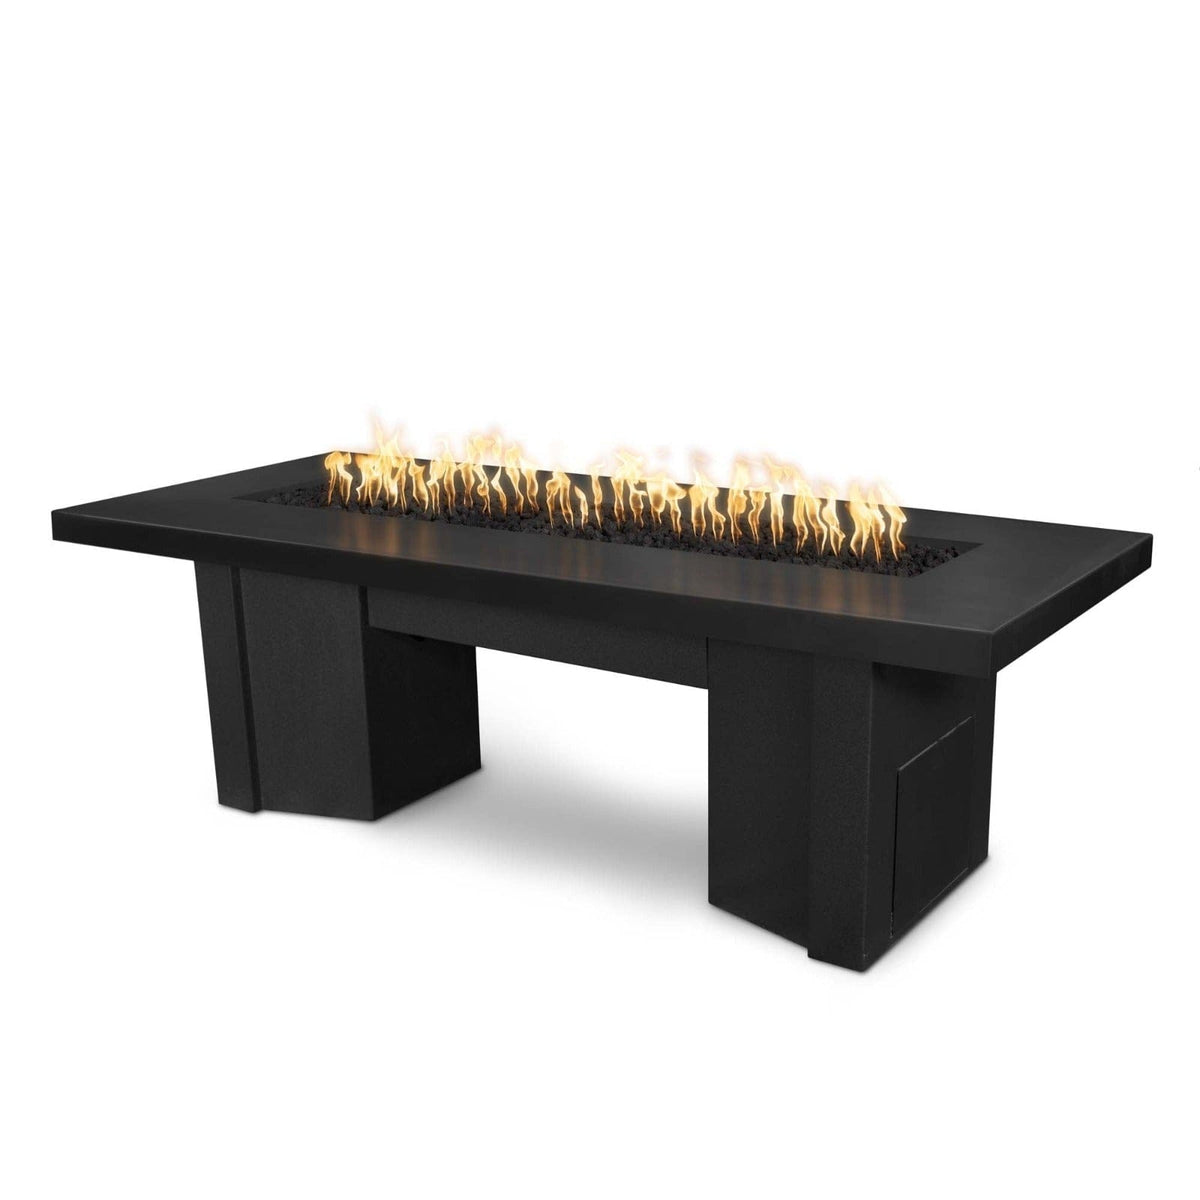 The Outdoor Plus Fire Features Black (-BLK) / Black Powder Coated Steel (-BLK) The Outdoor Plus 78&quot; Alameda Fire Table Smooth Concrete in Liquid Propane - Flame Sense System with Push Button Spark Igniter / OPT-ALMGFRC78FSEN-LP